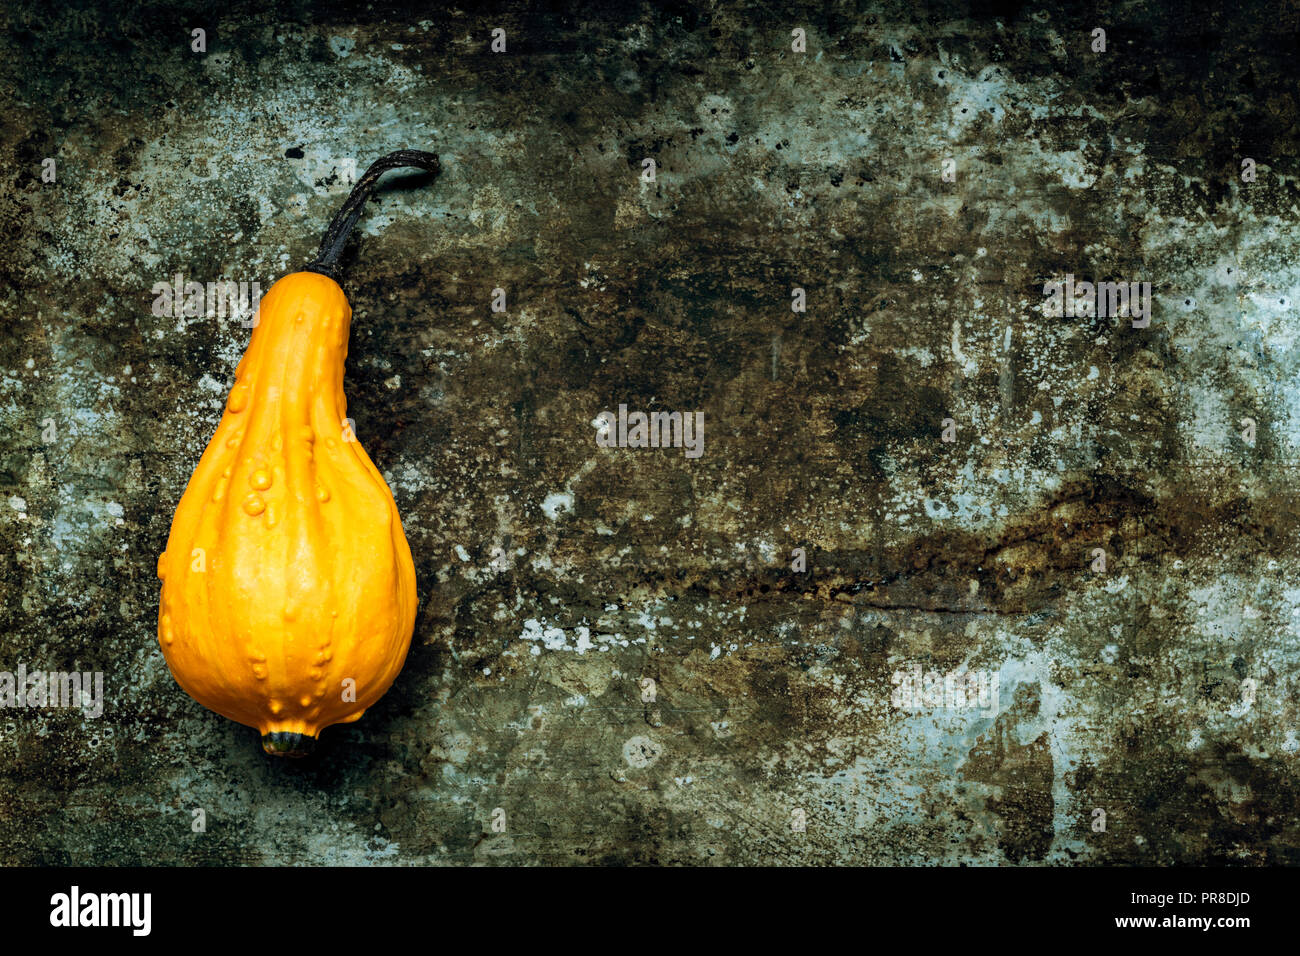 Happy Thanksgiving Background. Orange pumpkin on rustic metal background with copy space. Autumn Harvest and Holiday. Stock Photo